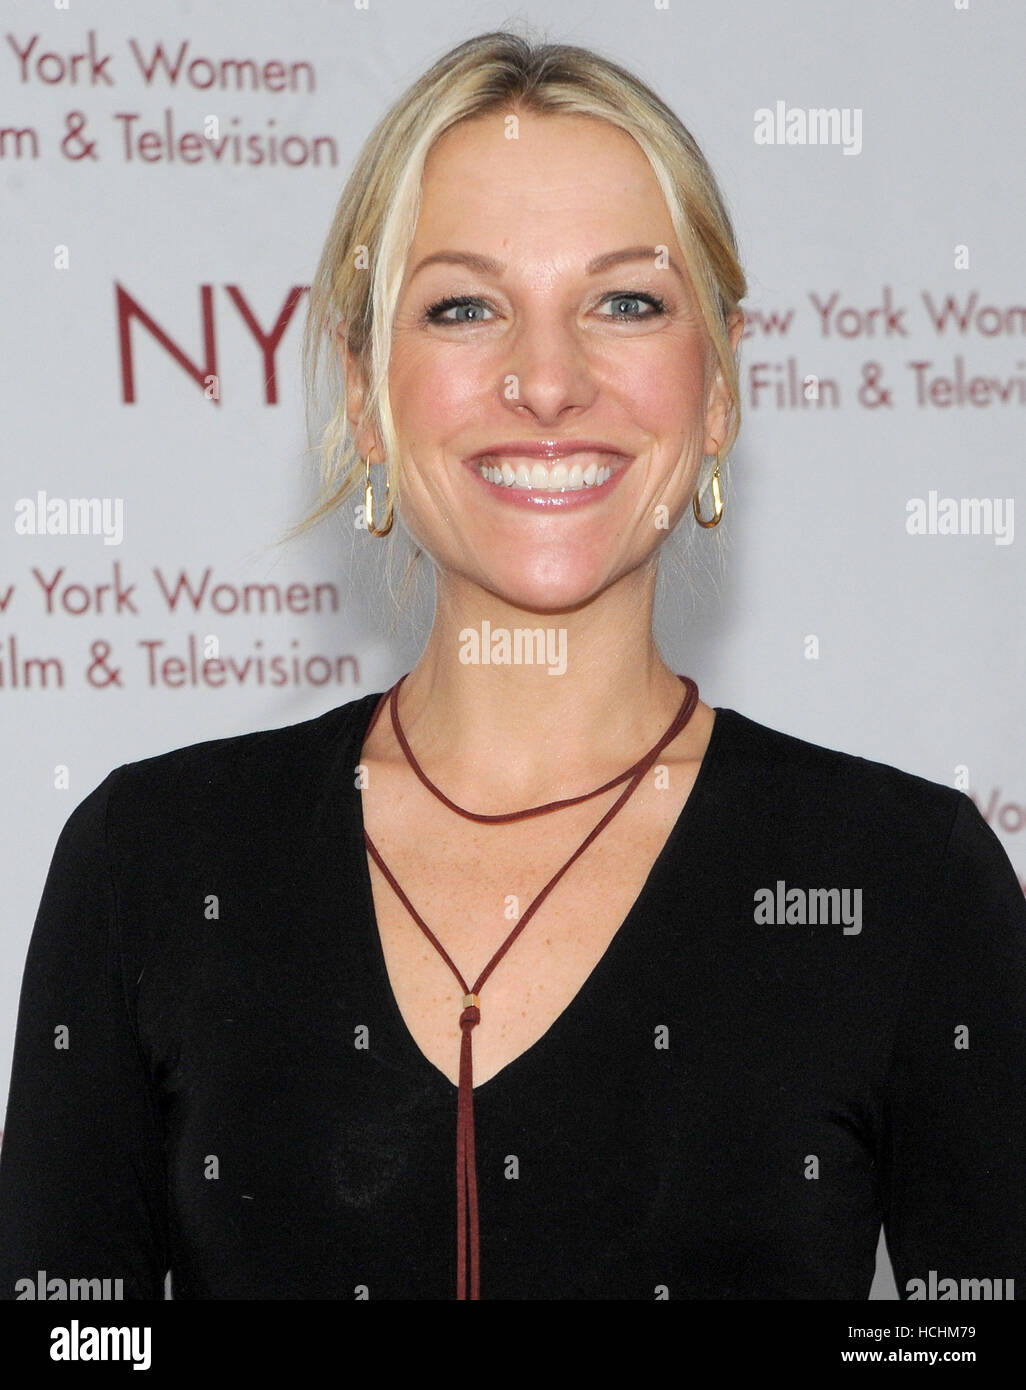 New York, NY, USA. 08th Dec, 2016. ESPN Sports Anchor Lindsay Czarniak attends the 37th Annual Muse Awards at New York Hilton Midtown on December 8, 2016 in New York City. Credit:  John Palmer/Media Punch/Alamy Live News Stock Photo